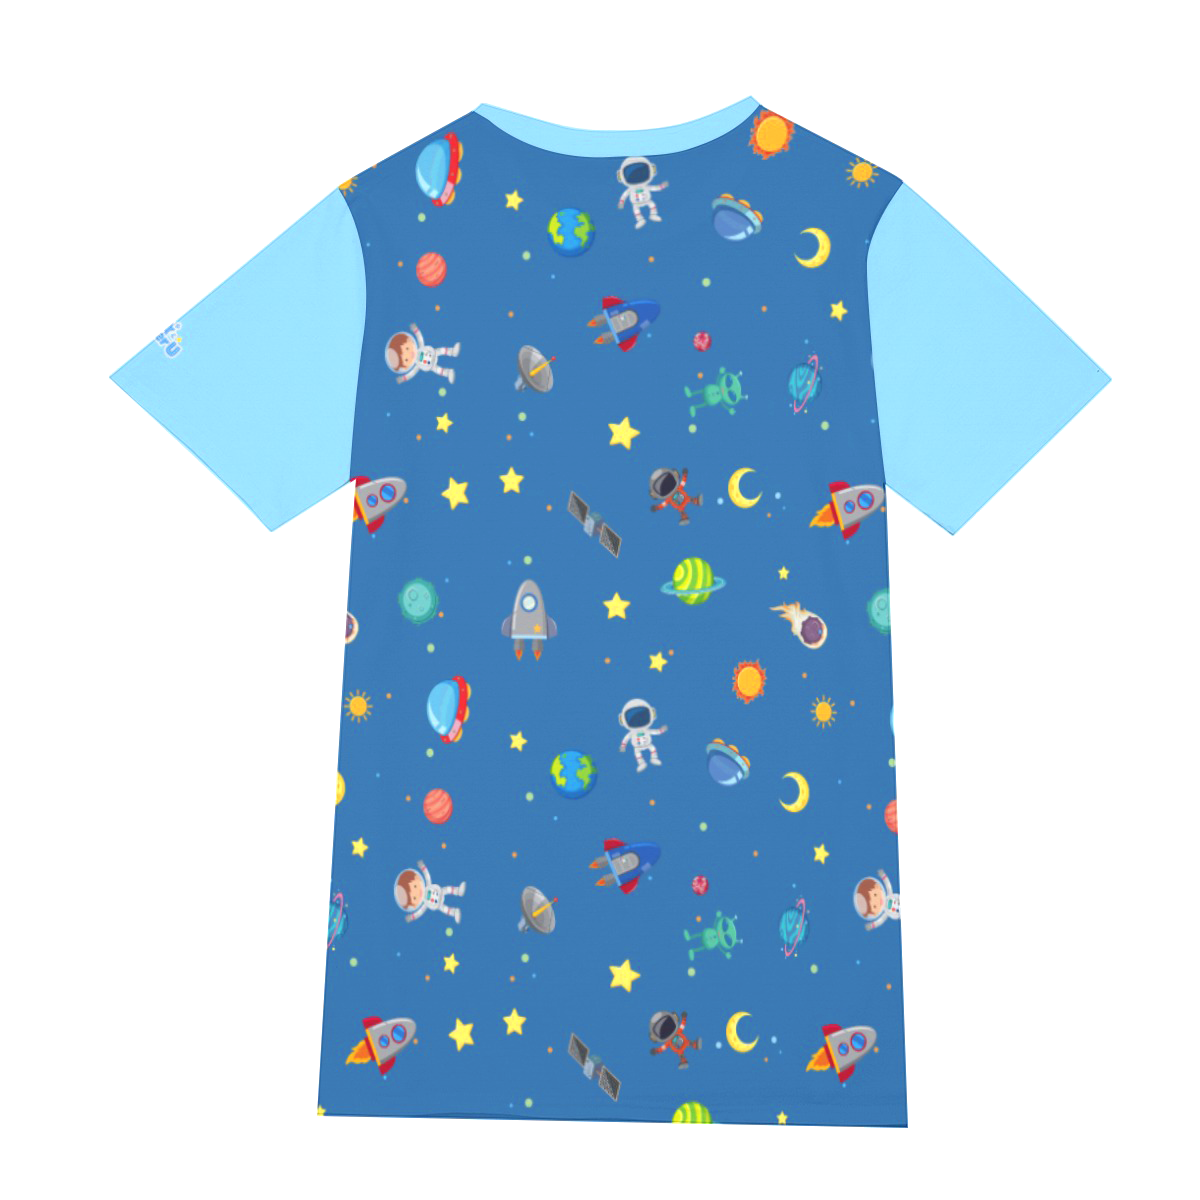 Adult Baby Play Shirt - Baby Astronaut